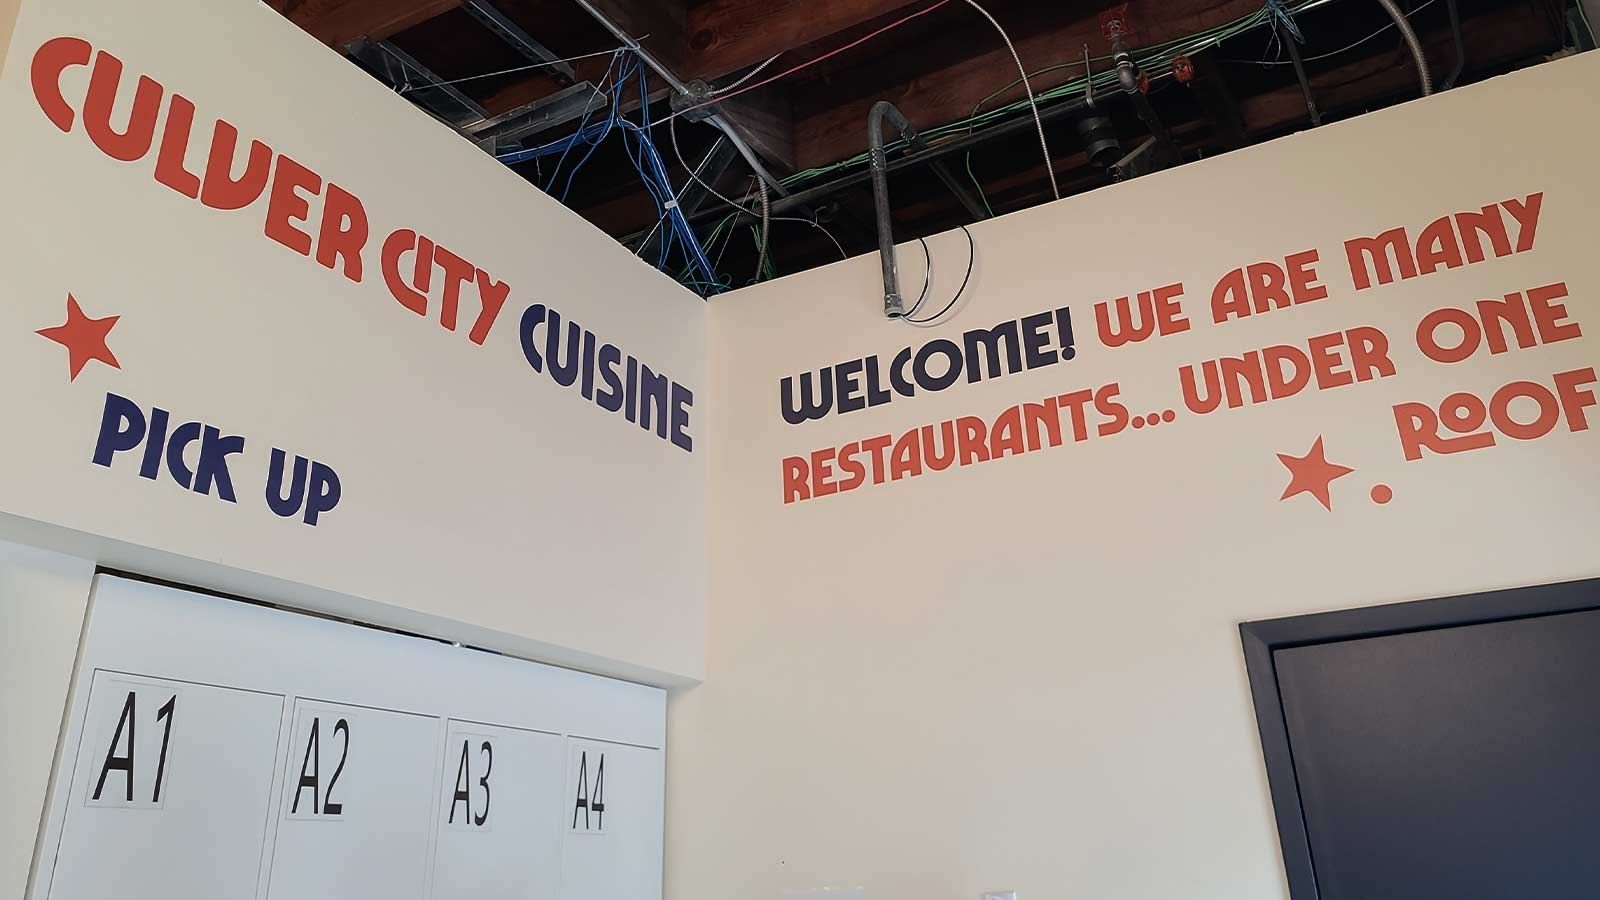 Culver City Cuisine vinyl lettering attached to the walls